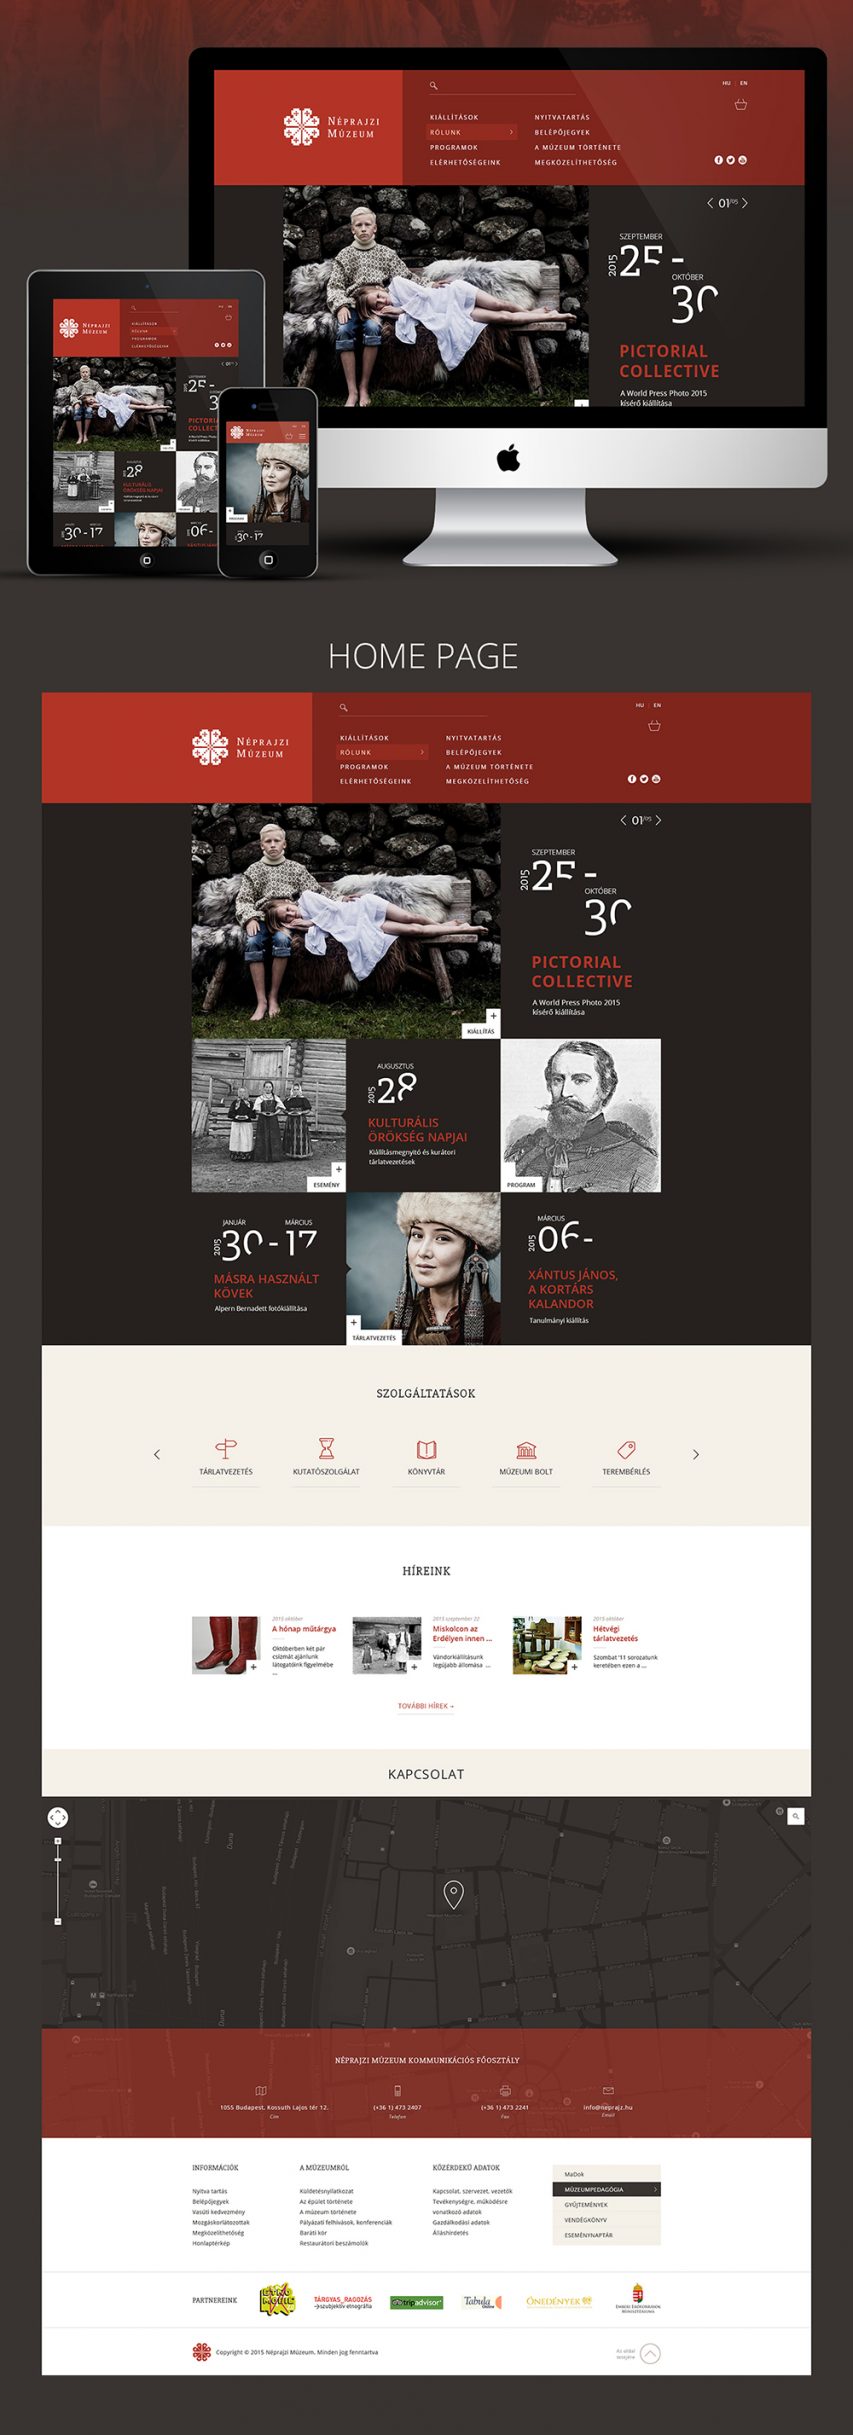 Photo Gallery Exhibition Website Free PSD Landing Page